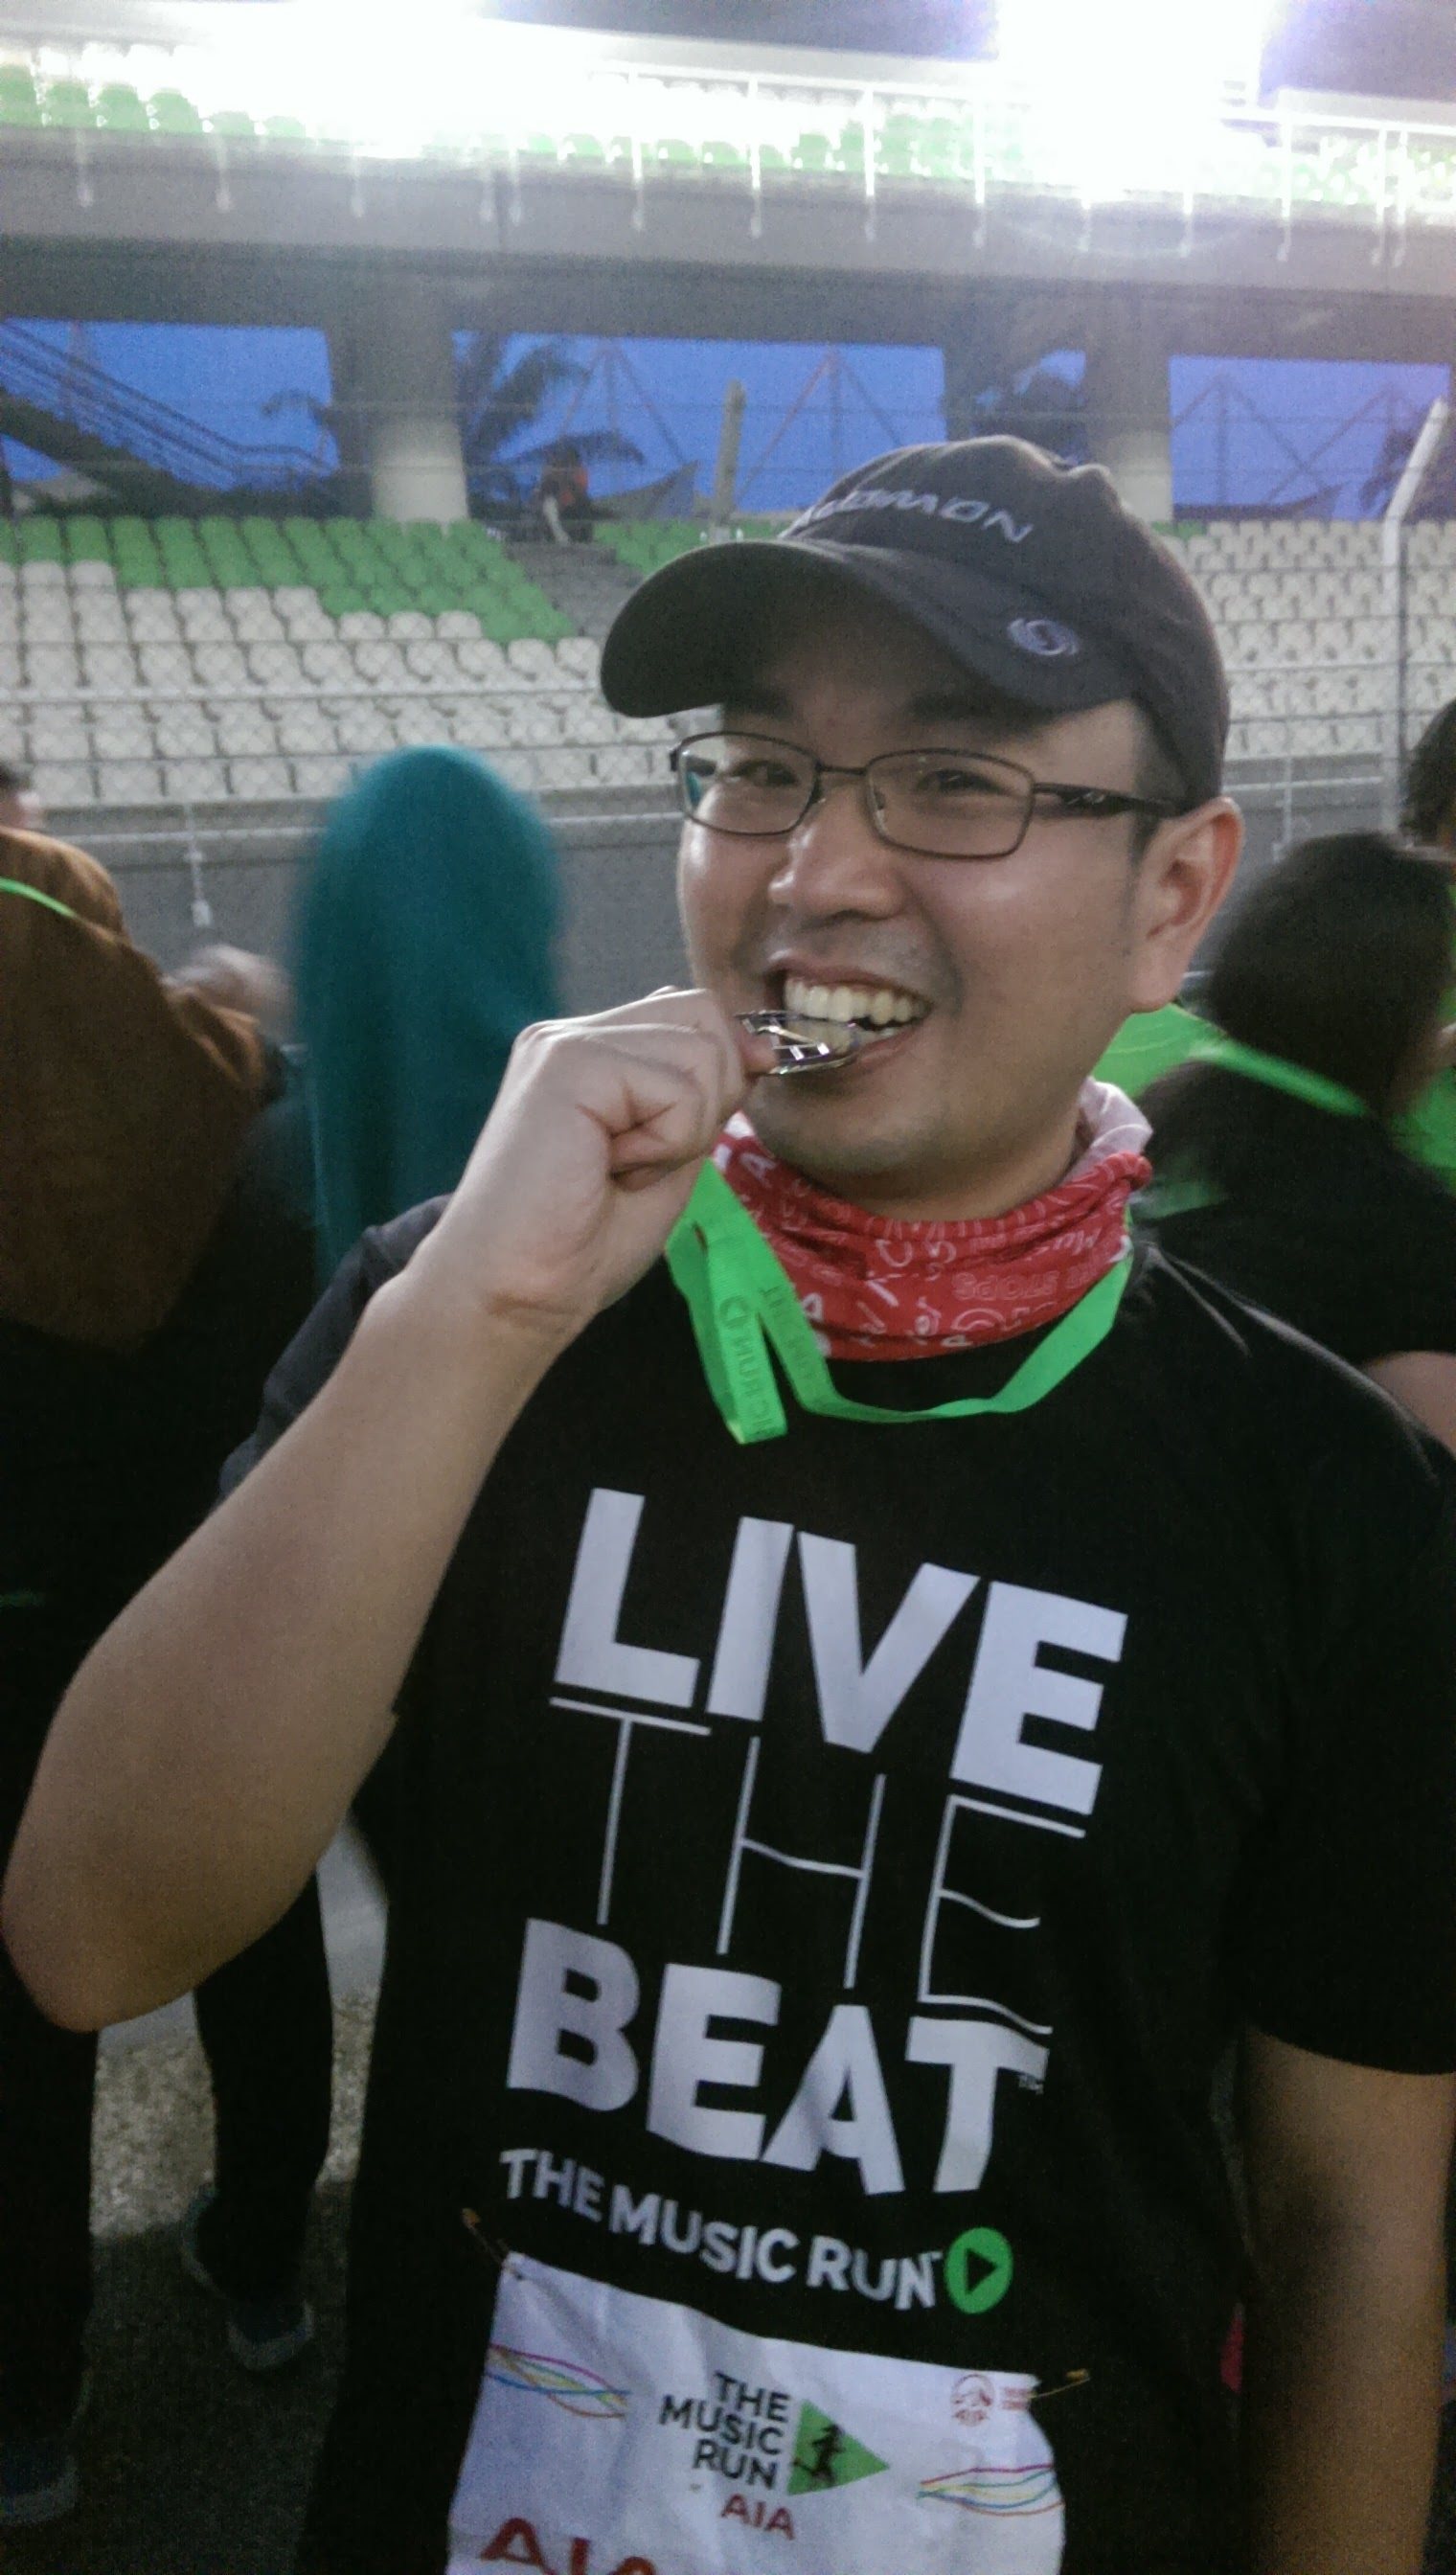 Kai En with his finisher's medal from Music Run 2015 at Sepang International Circuit